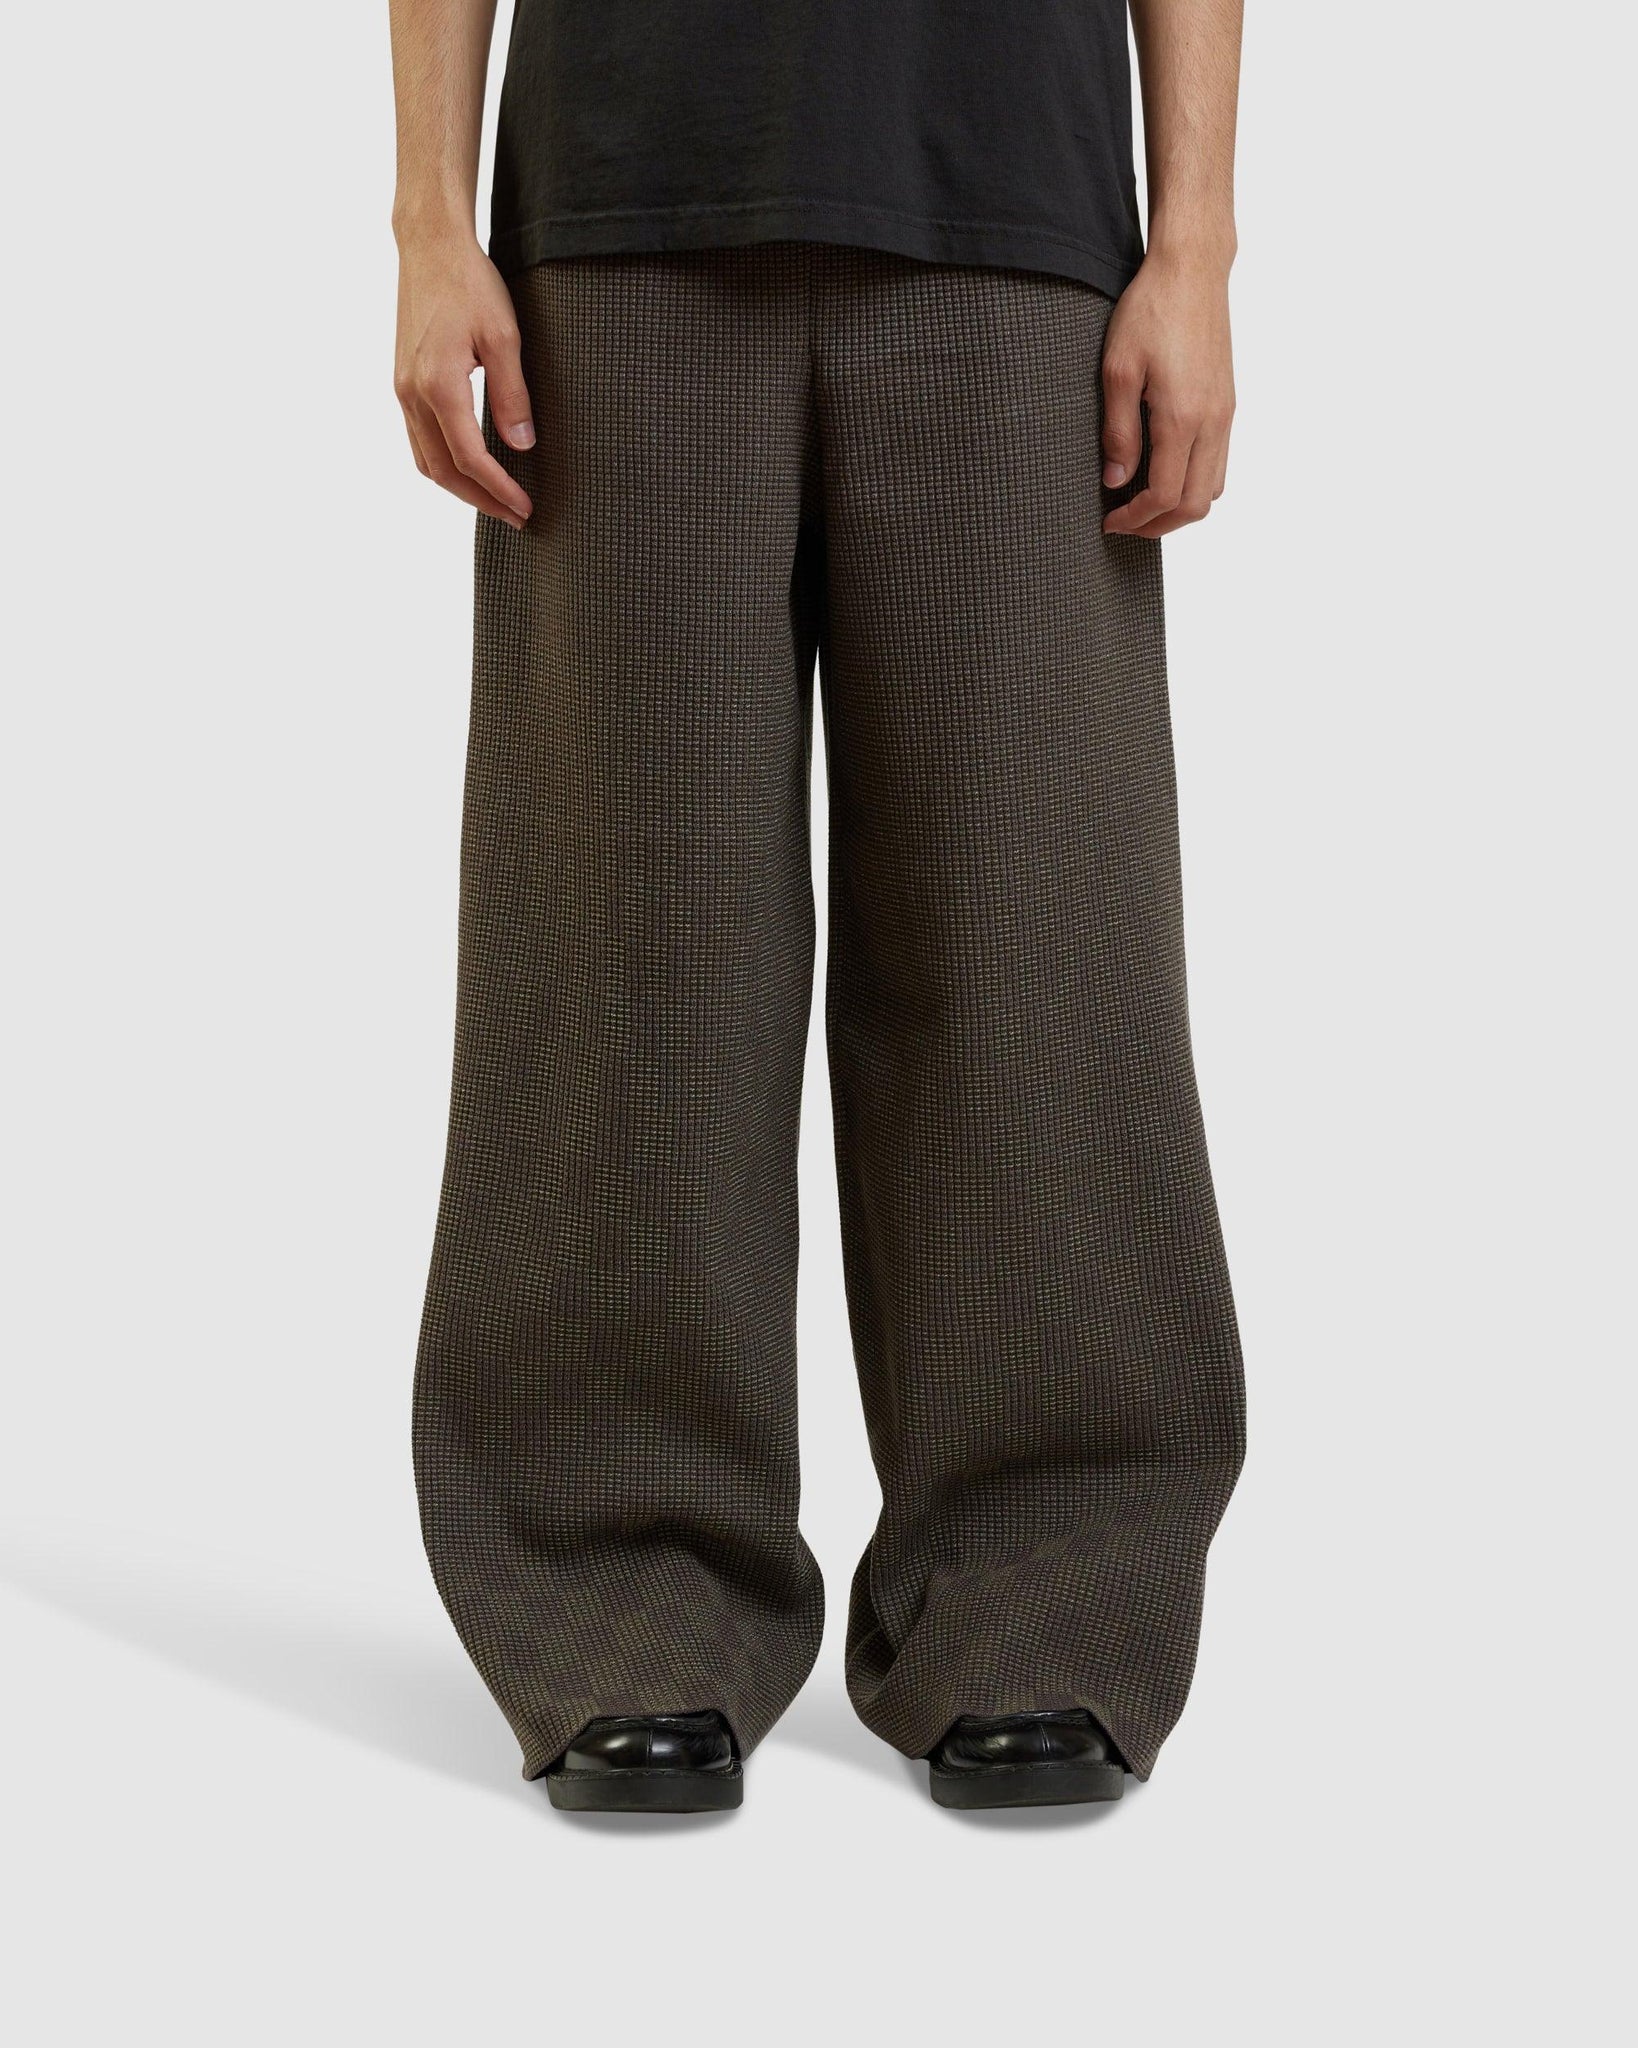 Delusion Check Loose Pants - {{ collection.title }} - Chinatown Country Club 